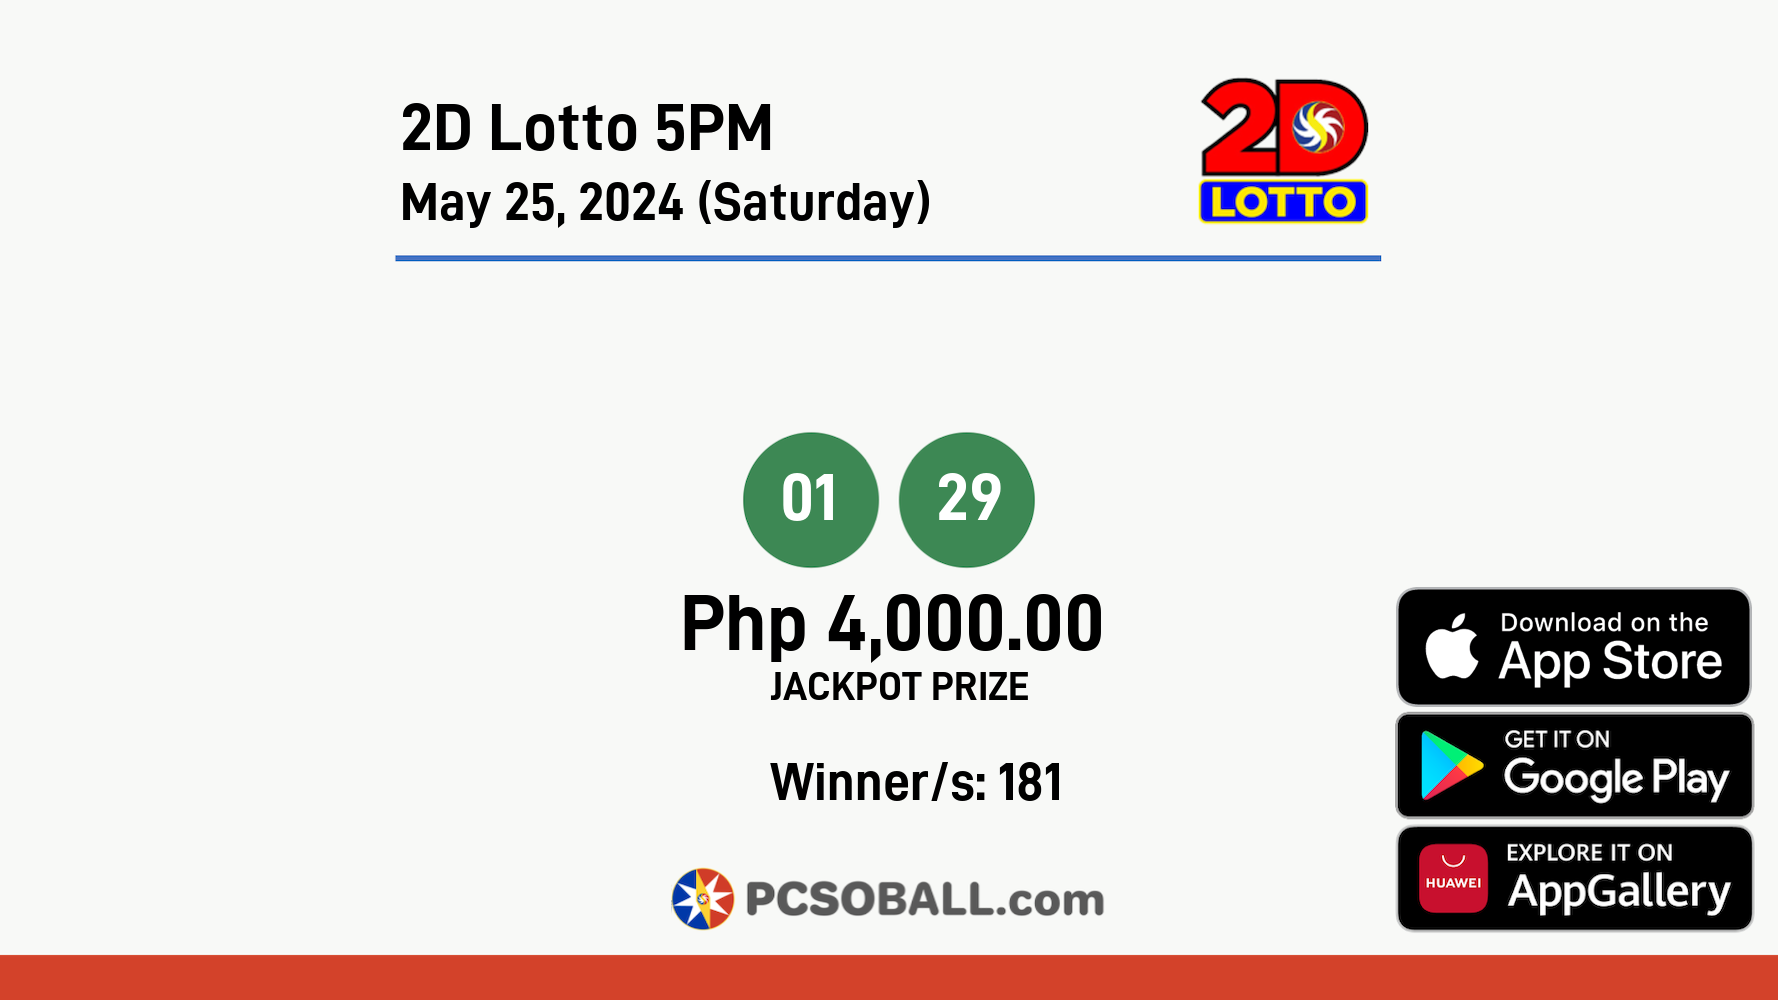 2D Lotto 5PM May 25, 2024 (Saturday) Result